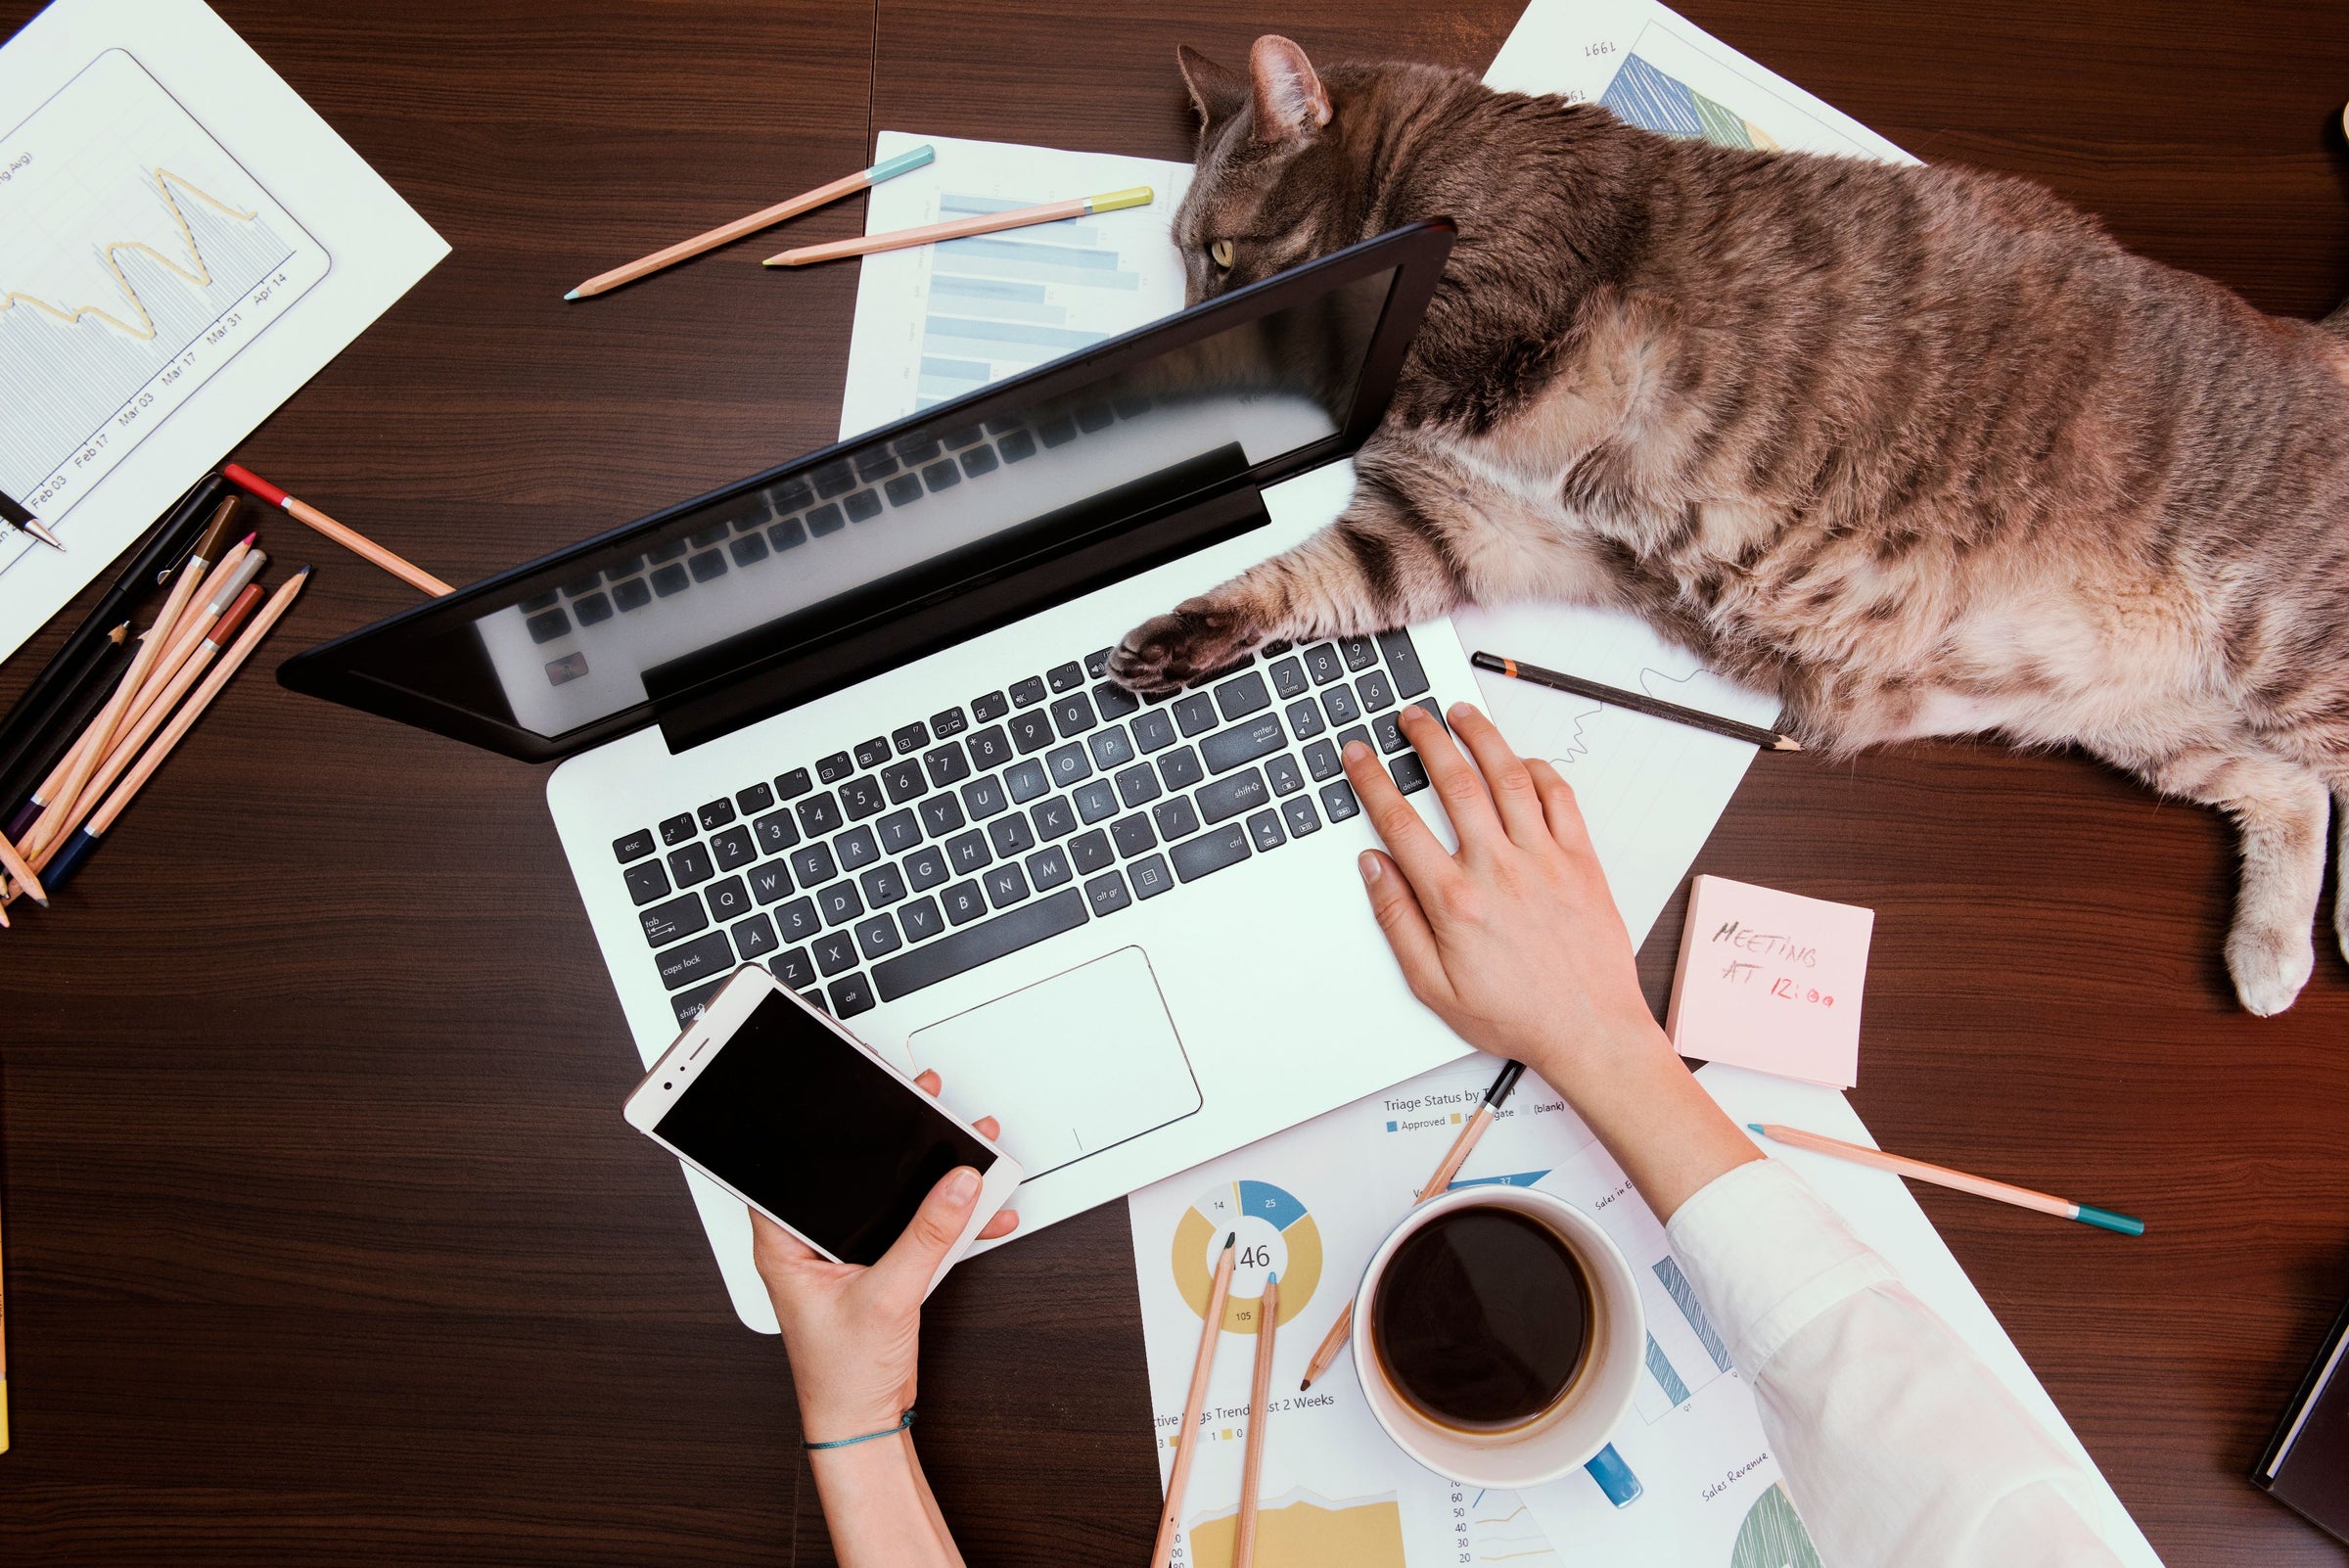 Tips for Bringing Your Cat to Work